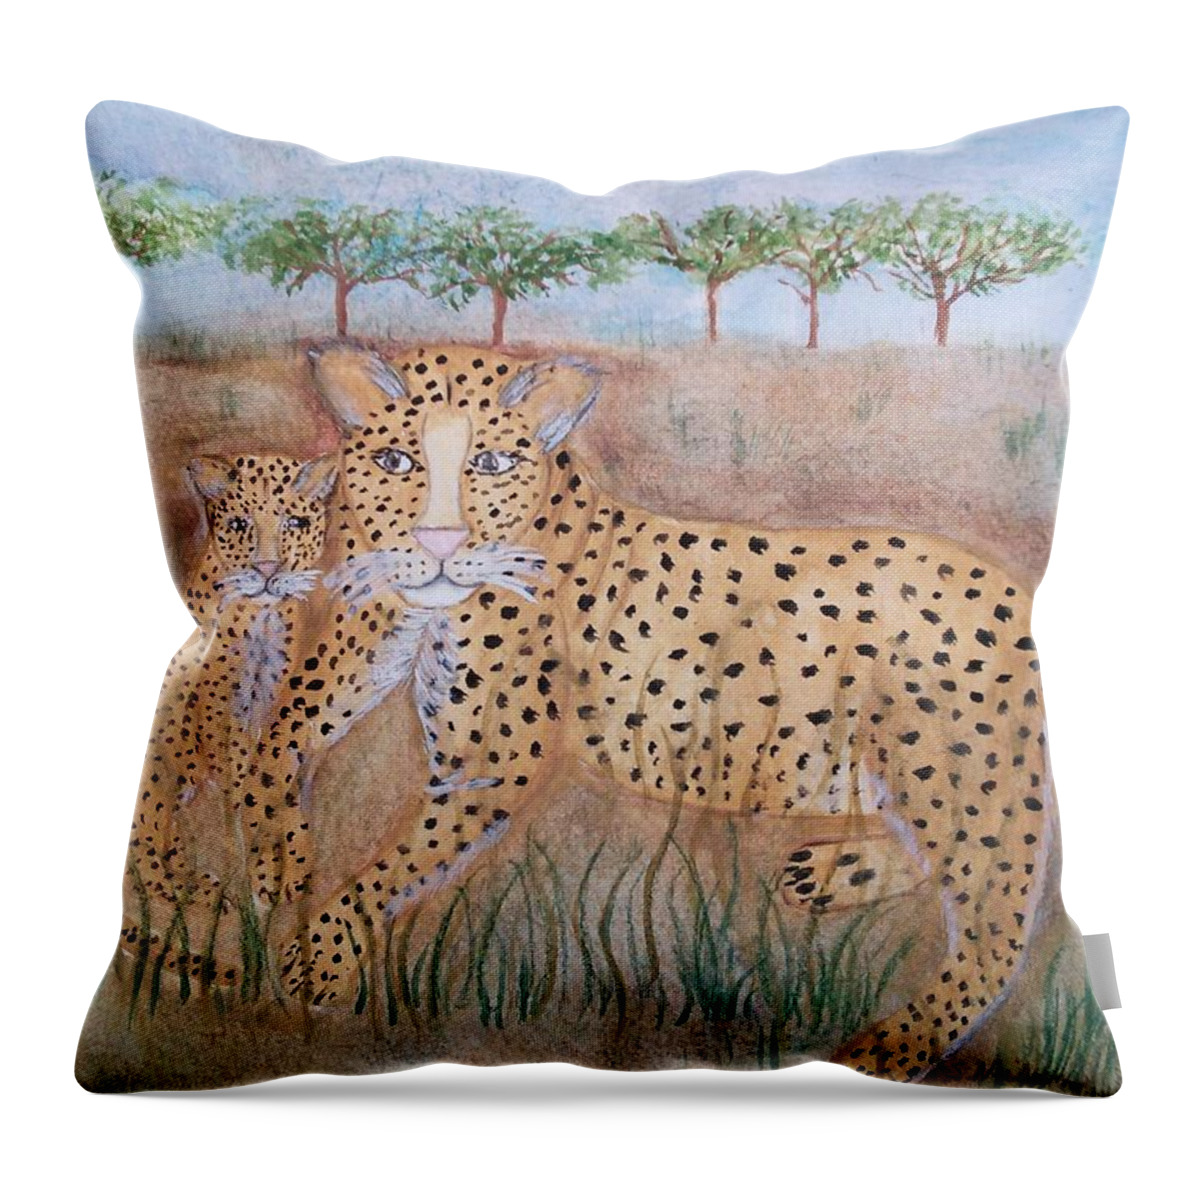 Whimsical Leopard With Cub Throw Pillow featuring the painting Leopard with cub by Susan Nielsen